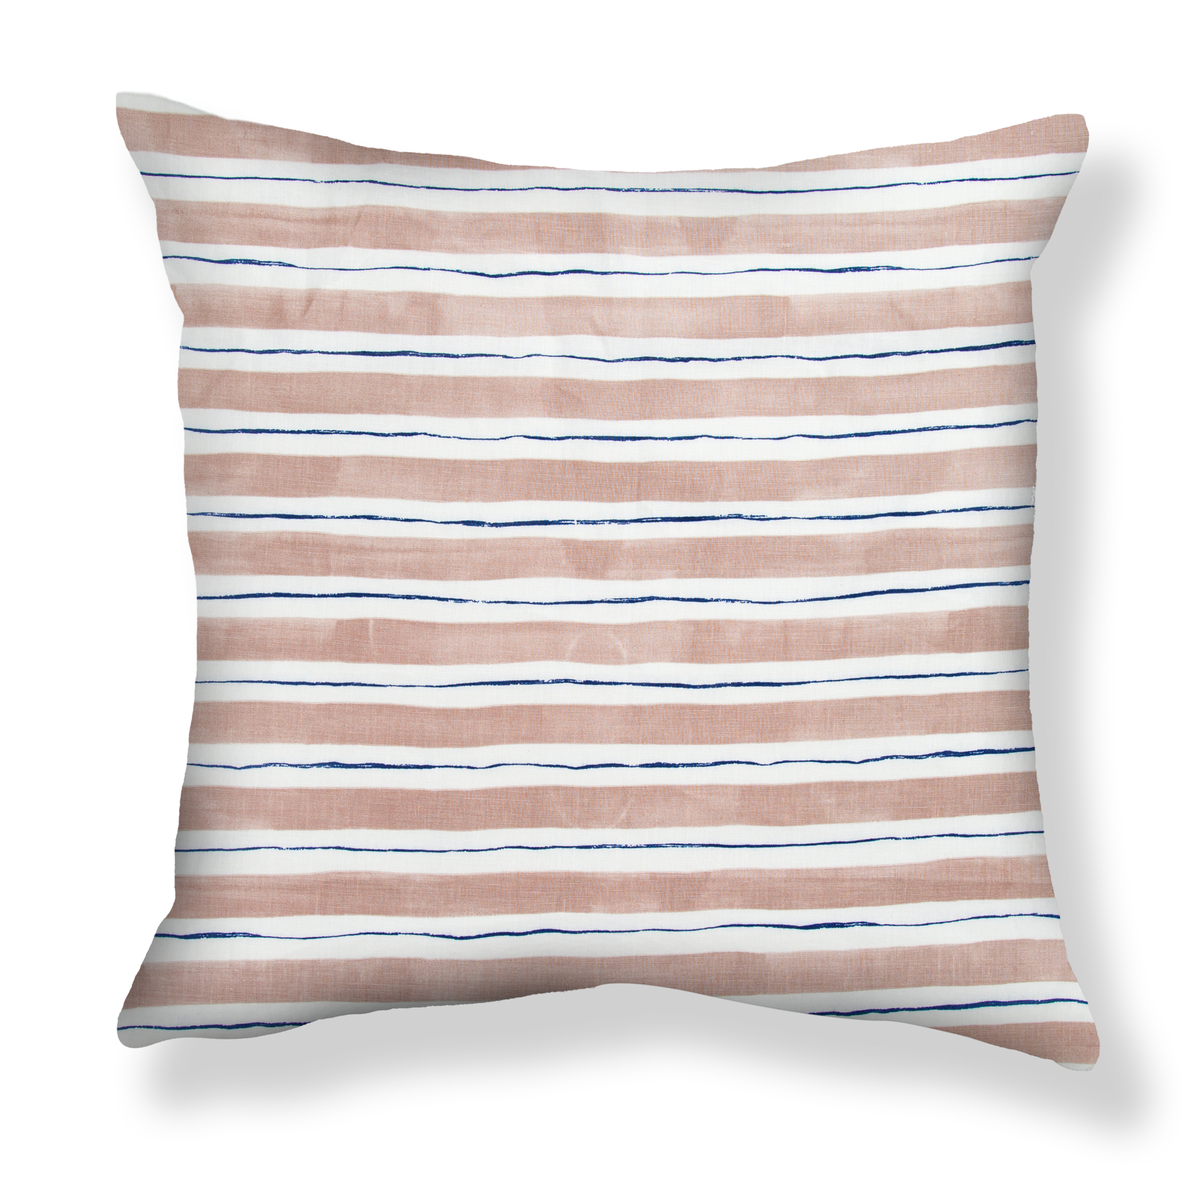 Painted Stripe Pillow in Coffee/Blauvelt Blue